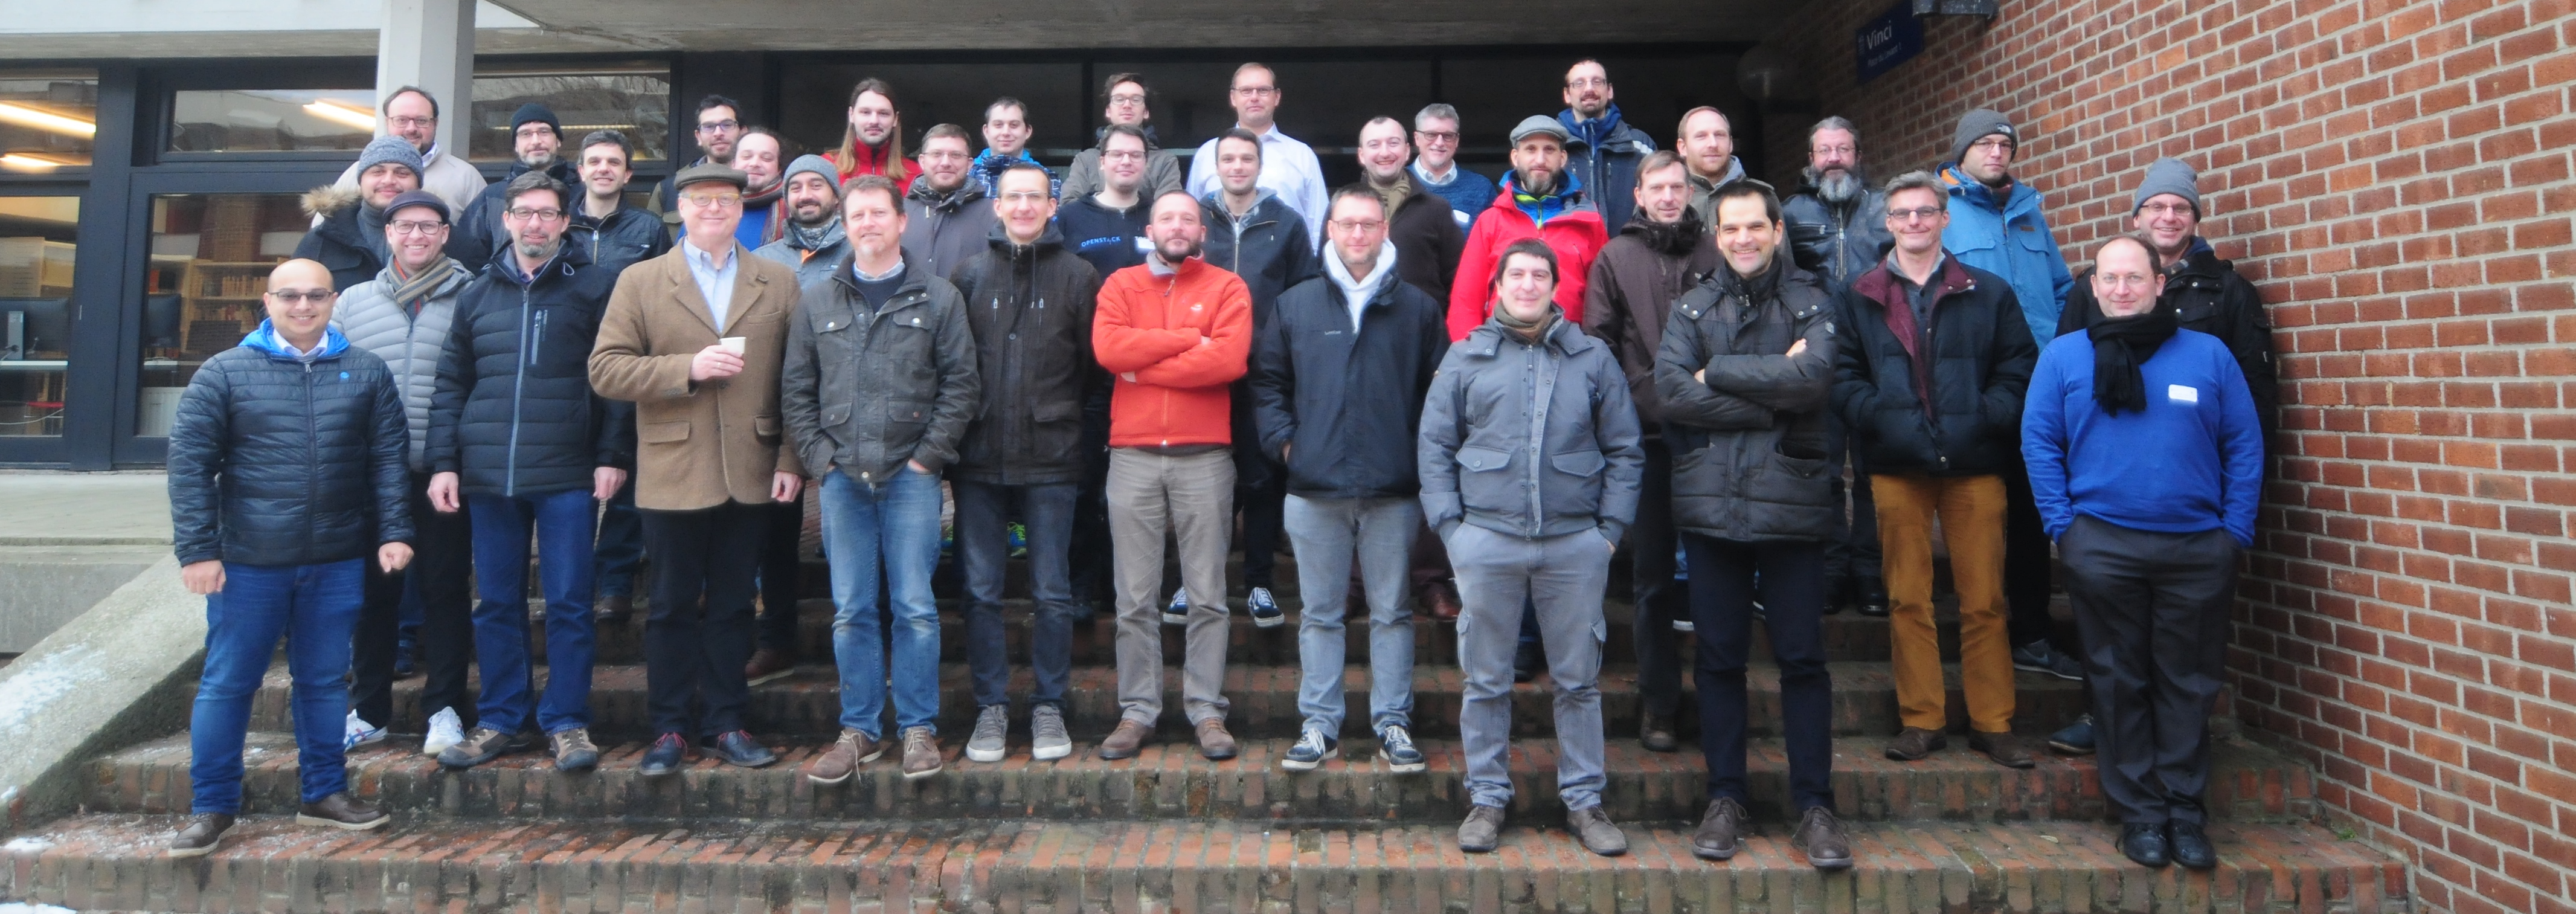 Group picture at 4th EasyBuild User Meeting @ UC Louvain